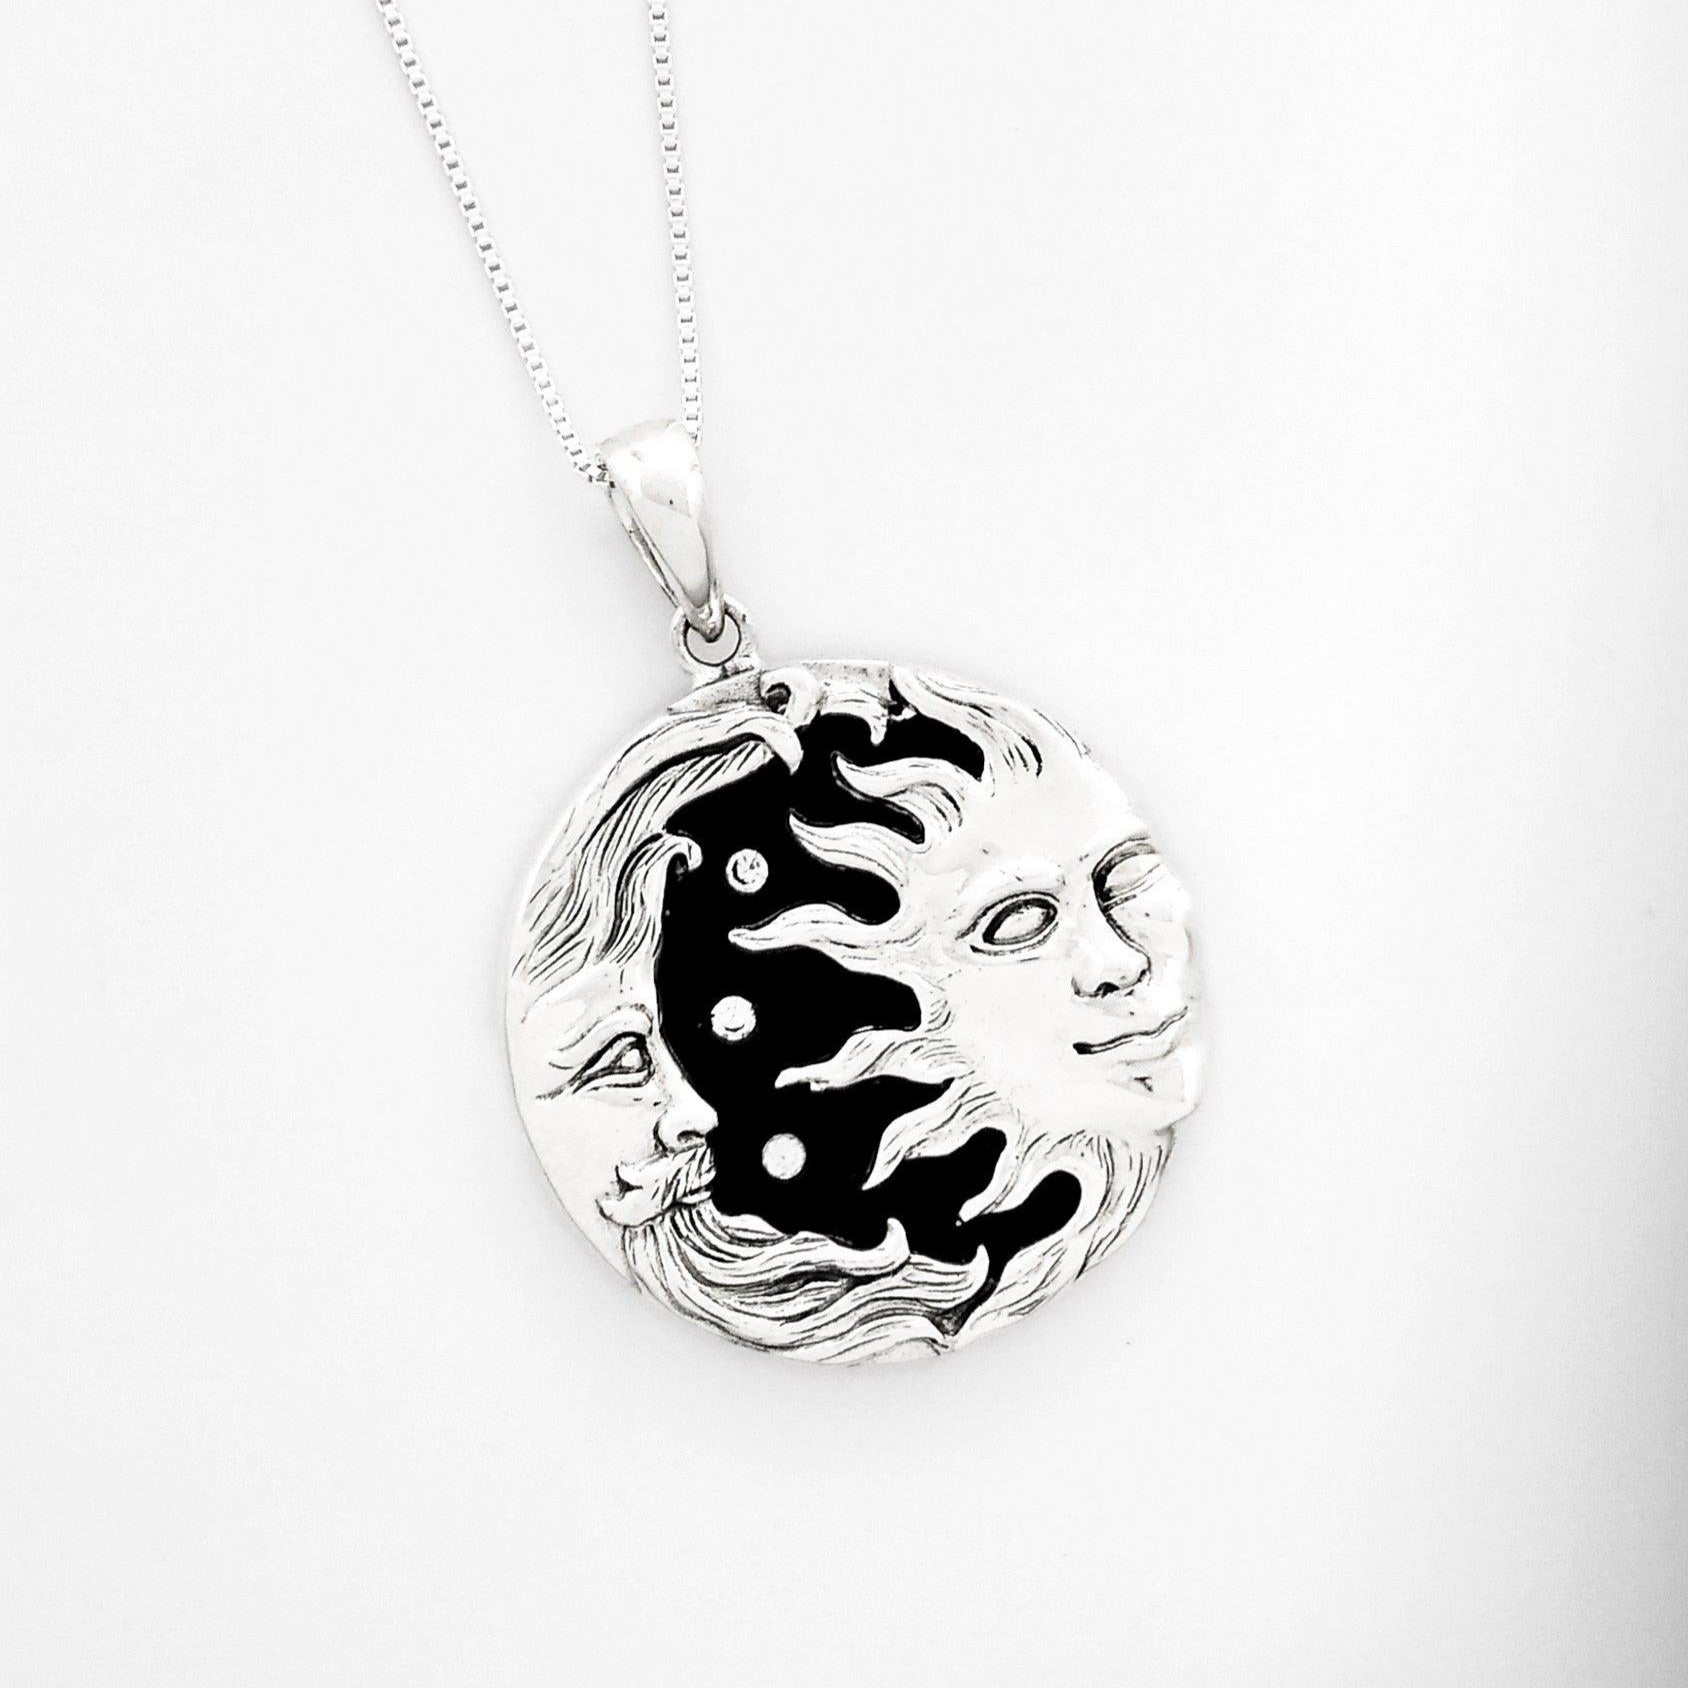 silver crescent moon with face and beard looking towards a half sun with face and rays extending towards the moon. Three small cubic zirconiums sit between them. Black onyx is the background.